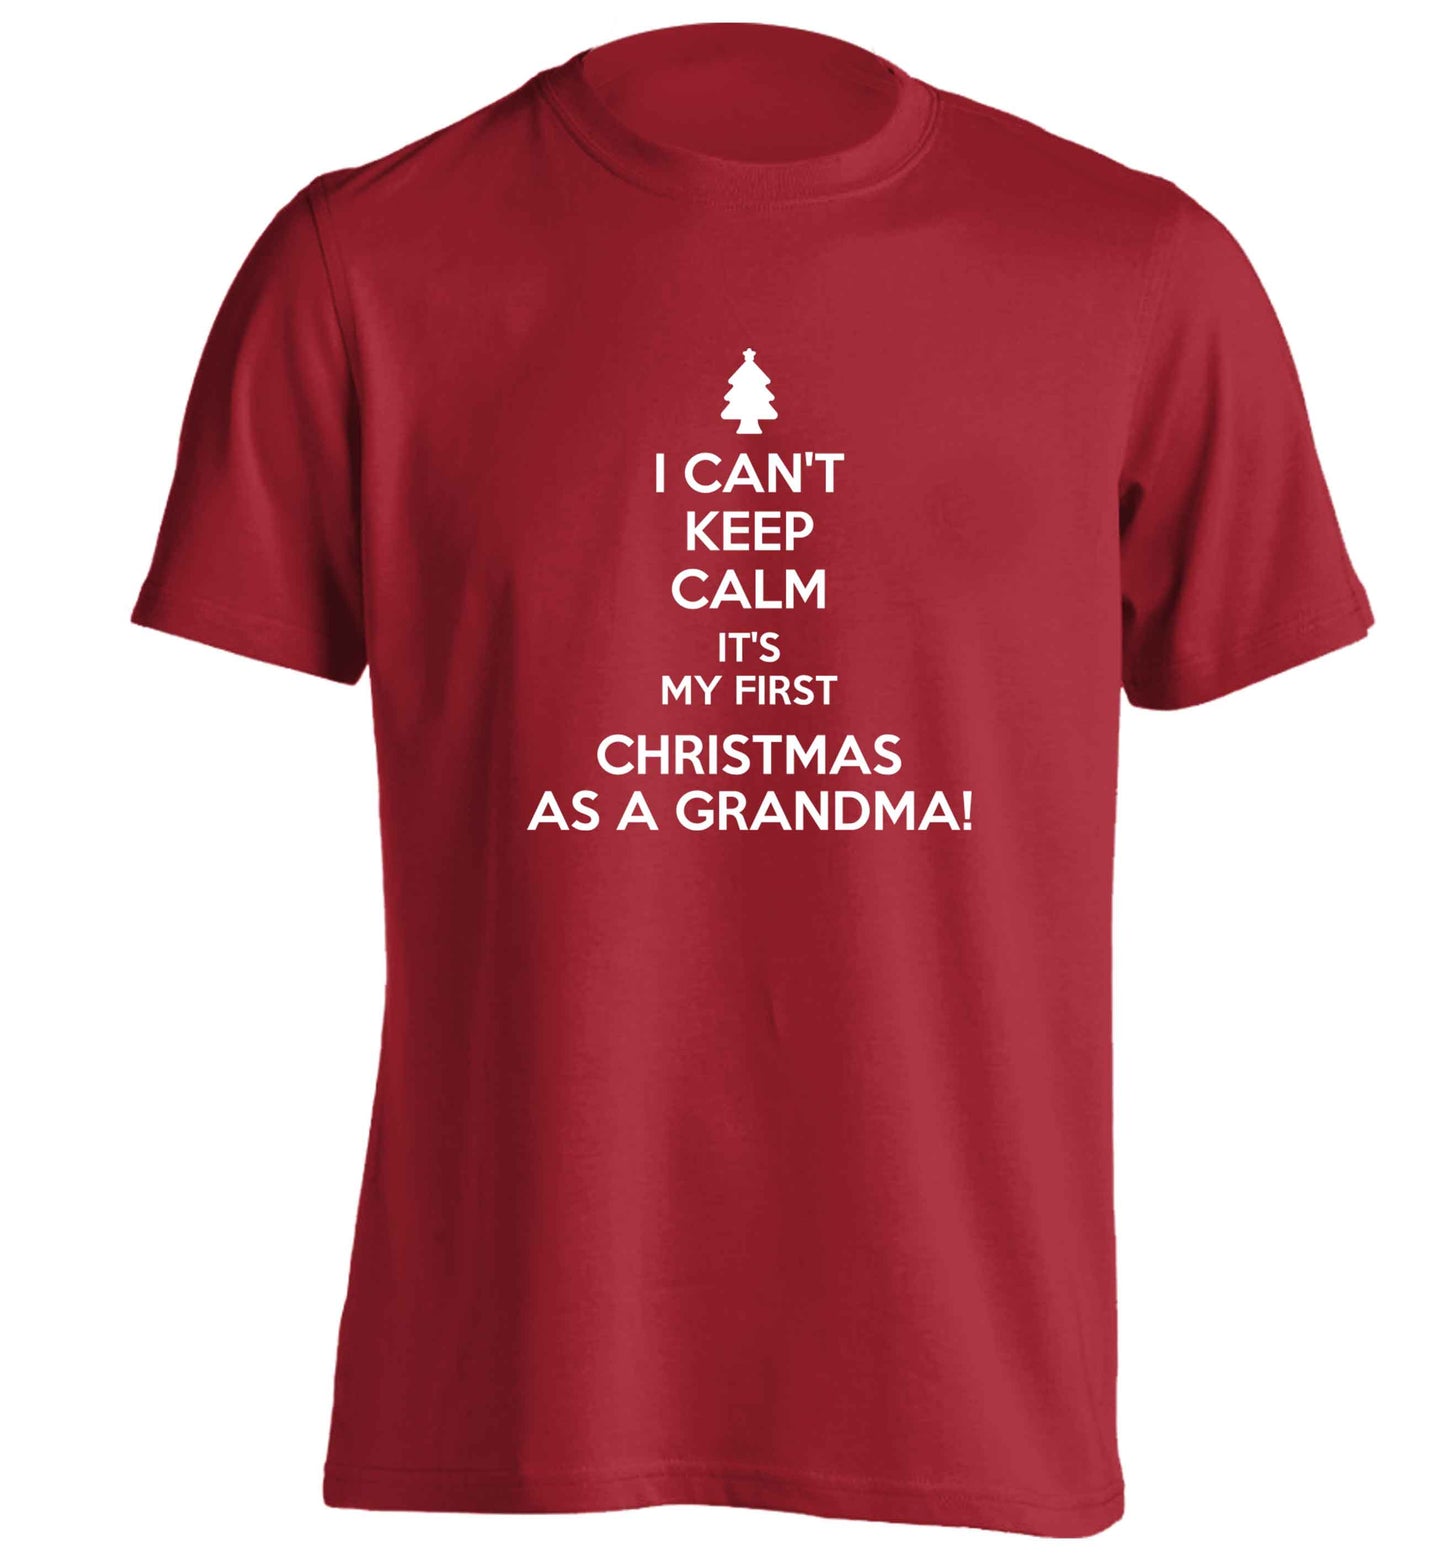 I can't keep calm it's my first Christmas as a grandma! adults unisex red Tshirt 2XL